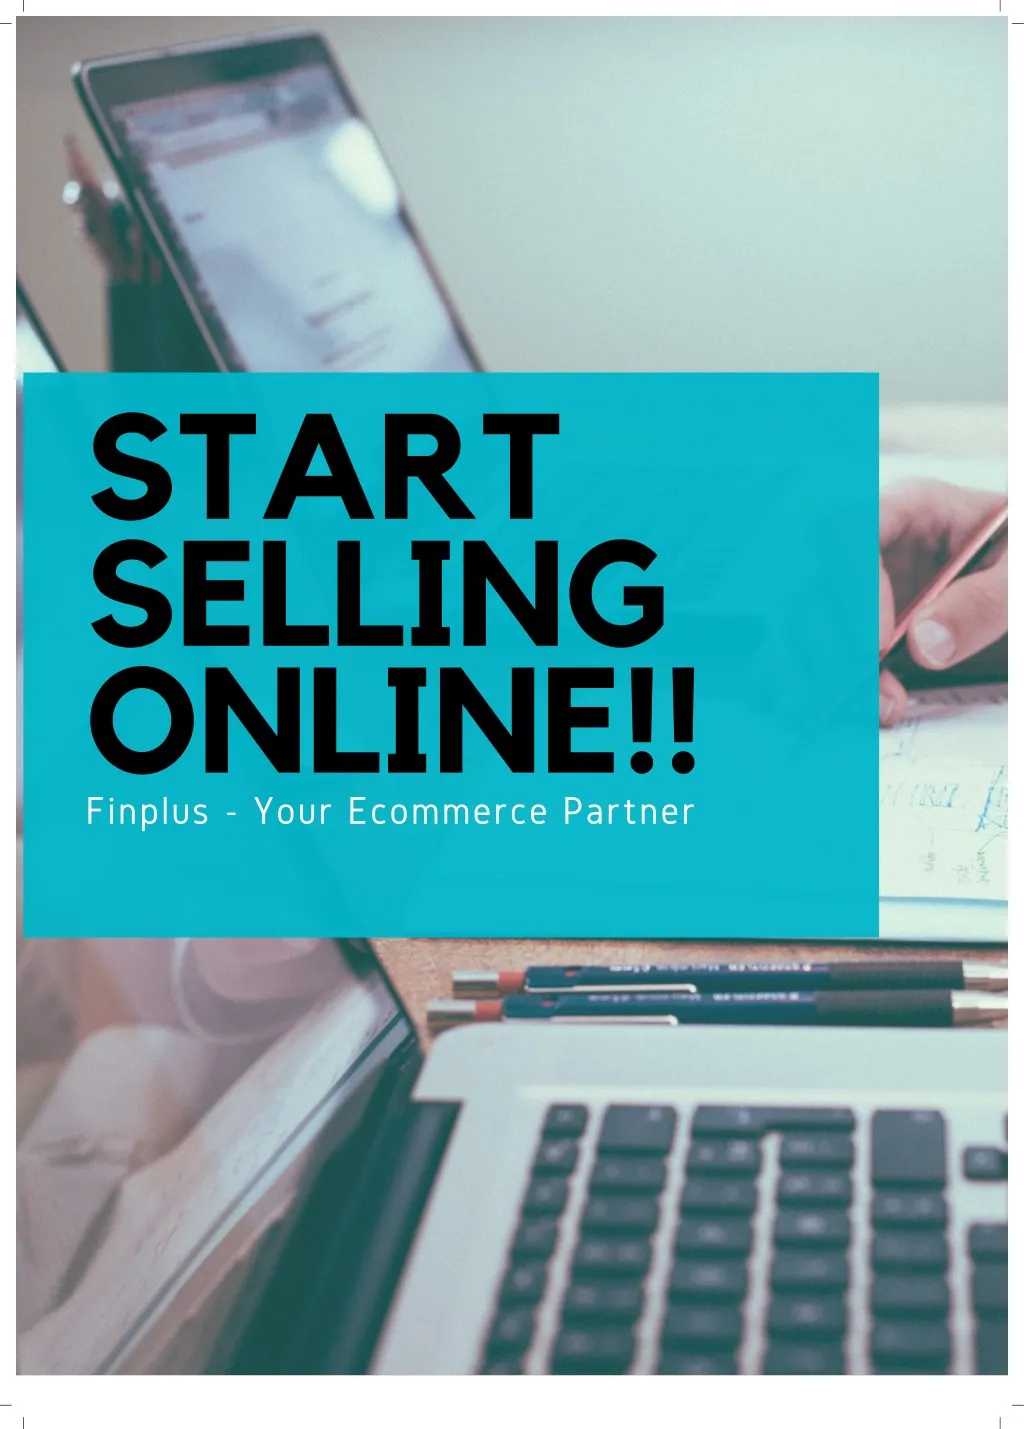 start selling online finplus your ecommerce